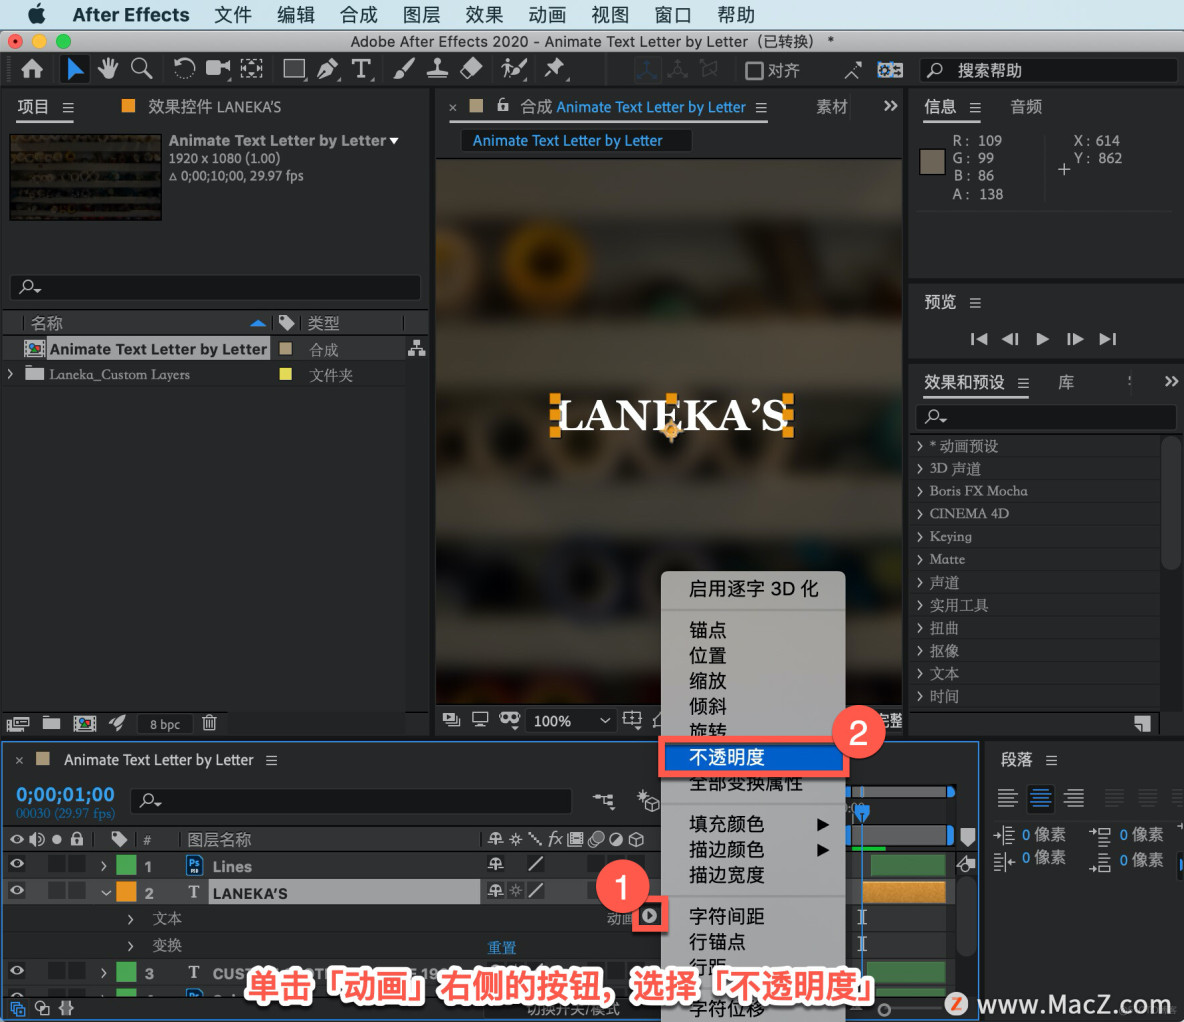 After Effects 教程，如何在 After Effects 中创建每个角色的动画？_After Effects_04